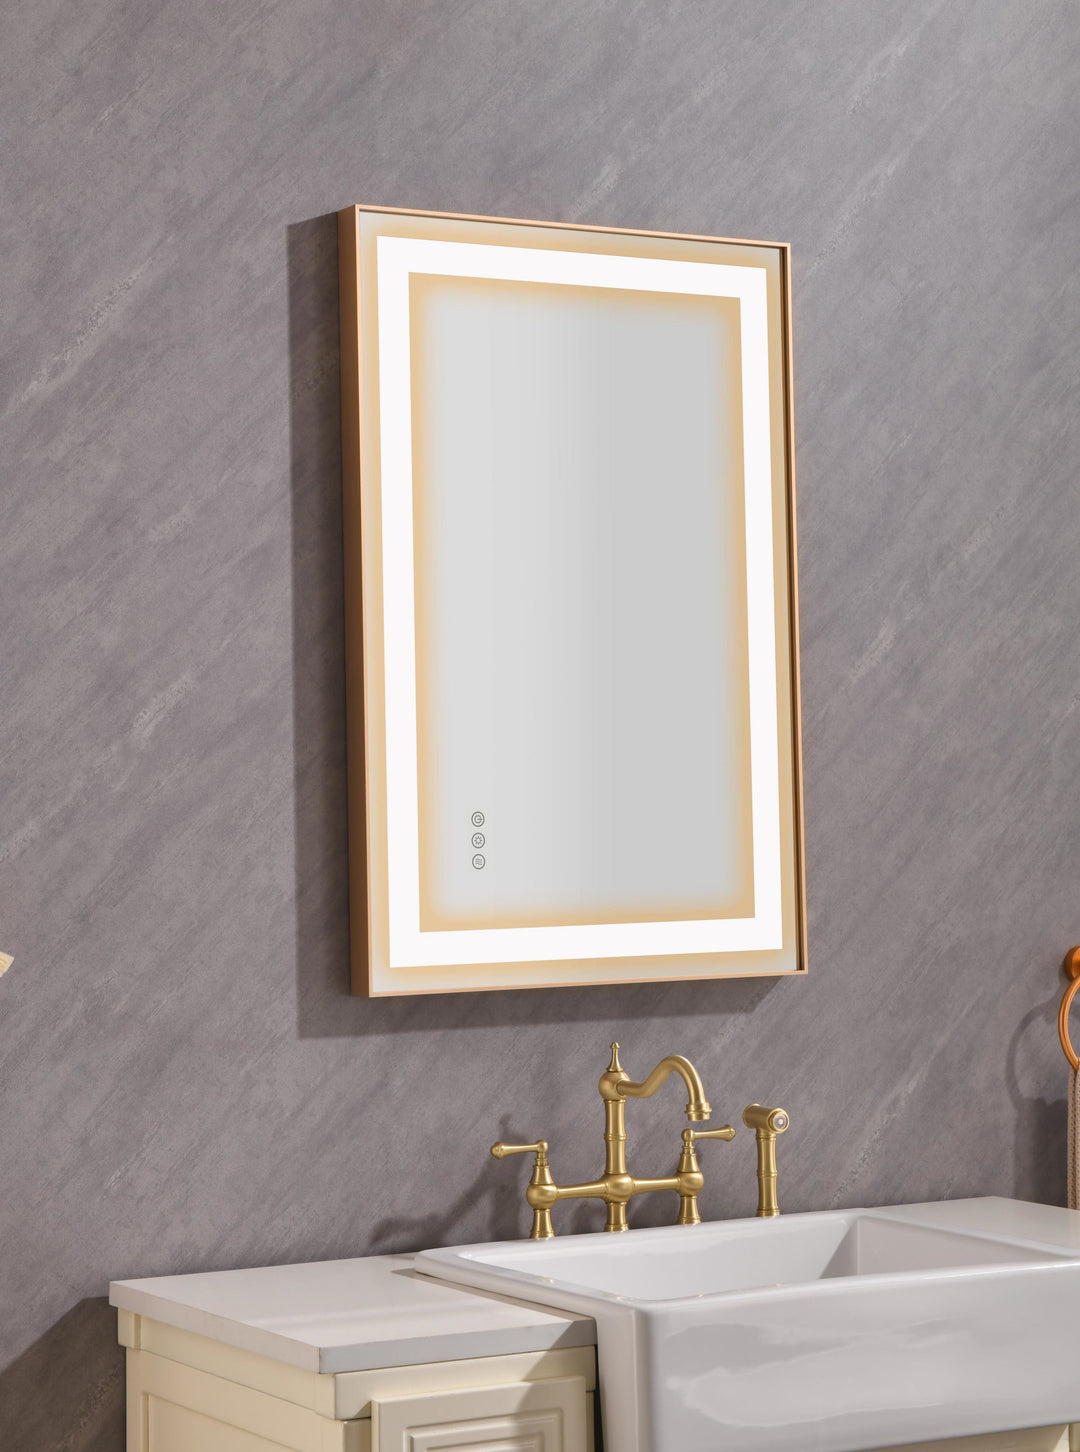 36 in x 24 in Framed LED Lighted Bathroom Wall Mounted Mirror with High Lumen+Anti-Fog Separately Control